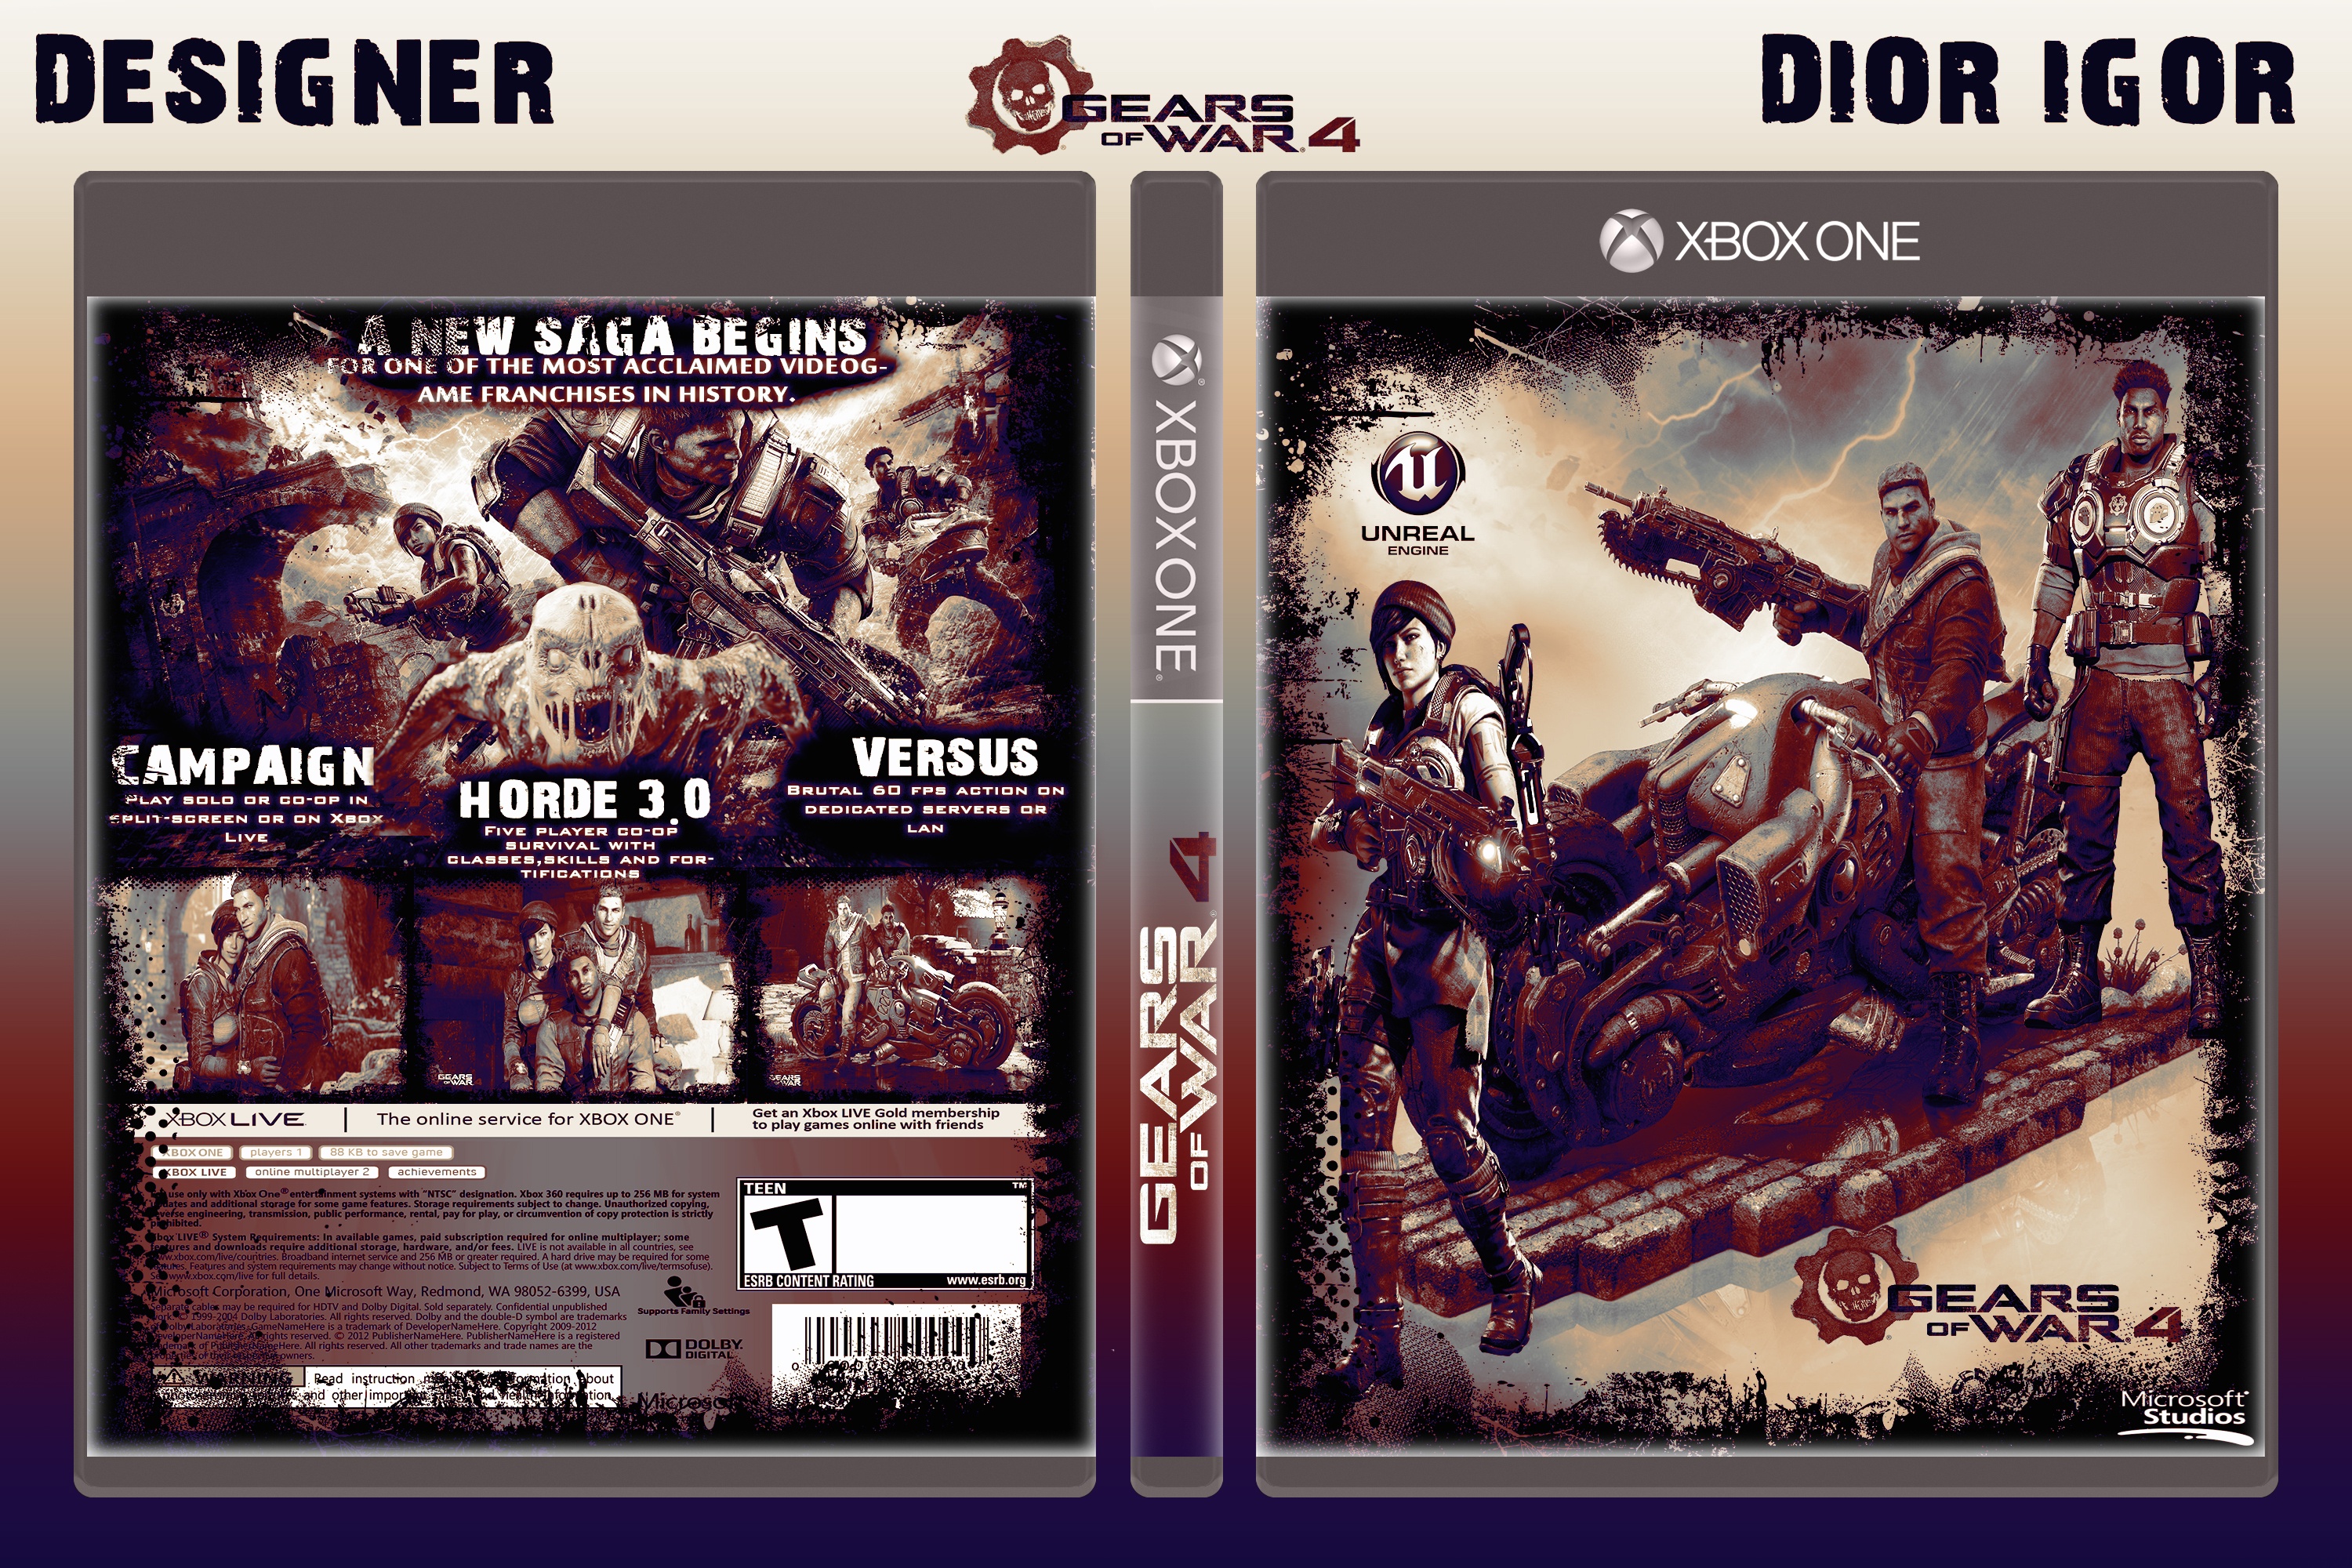 Gears of War 4 box cover